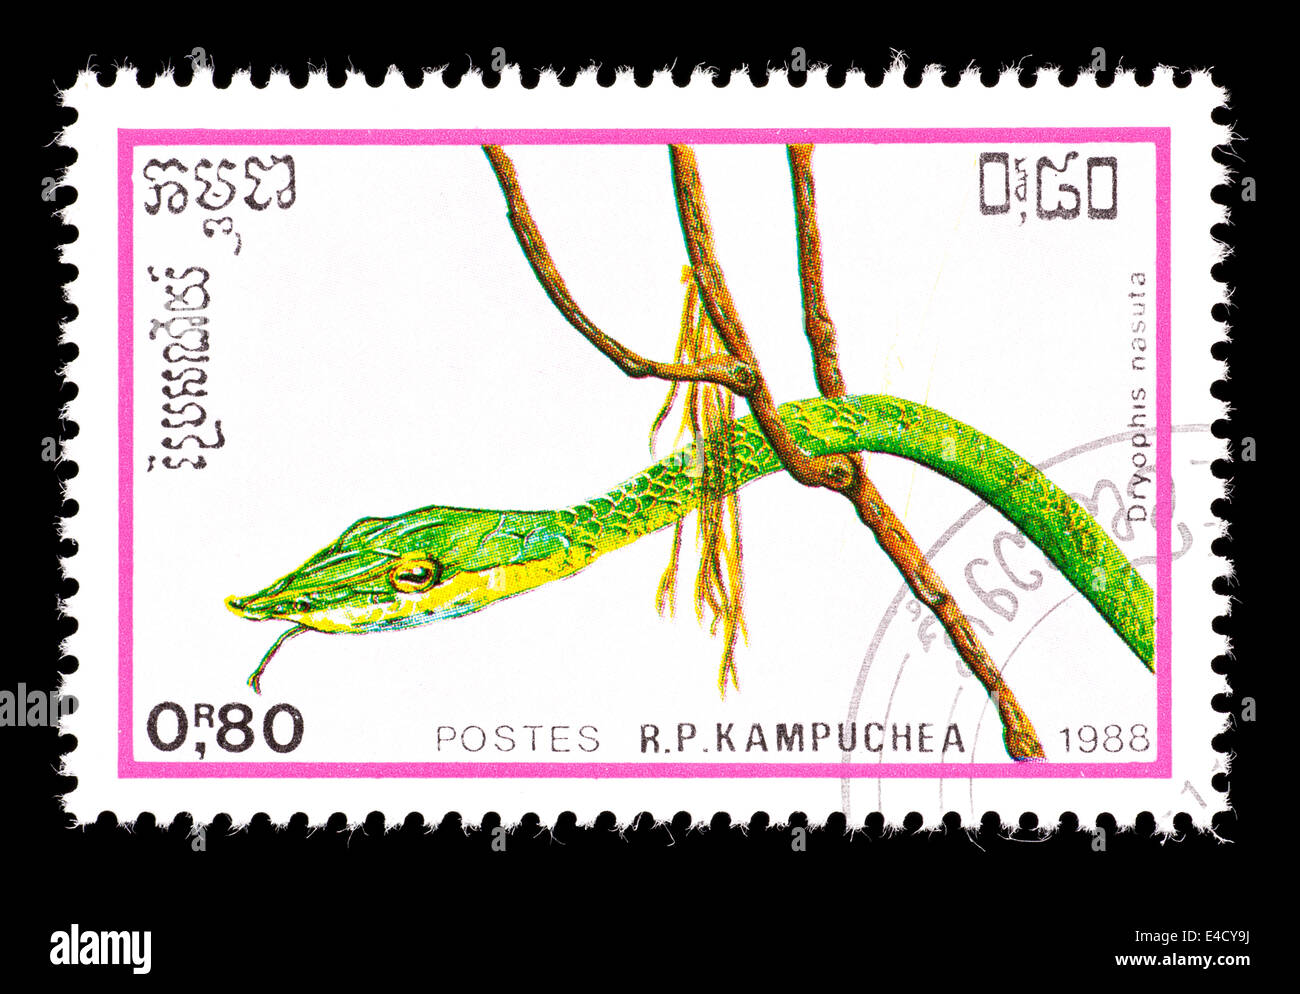 Postage stamp from Cambodia (Kampuchea) depicting a green vine snake (Dryophis nasuta) Stock Photo